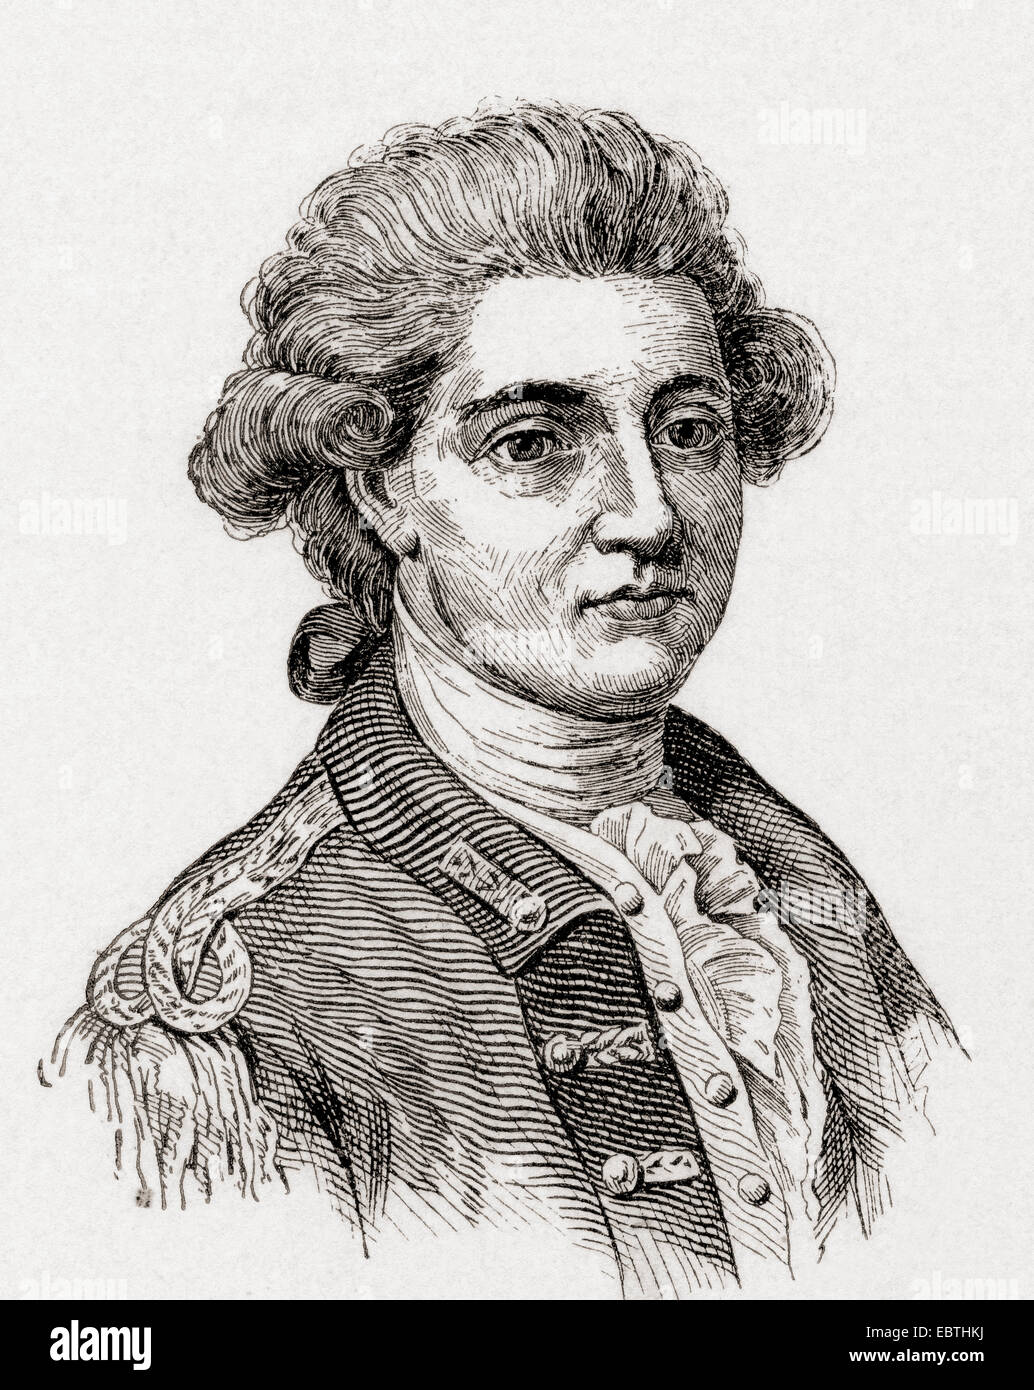 John André, 1750 –1780. British Army officer hanged as a spy during the American Revolutionary War. Stock Photo